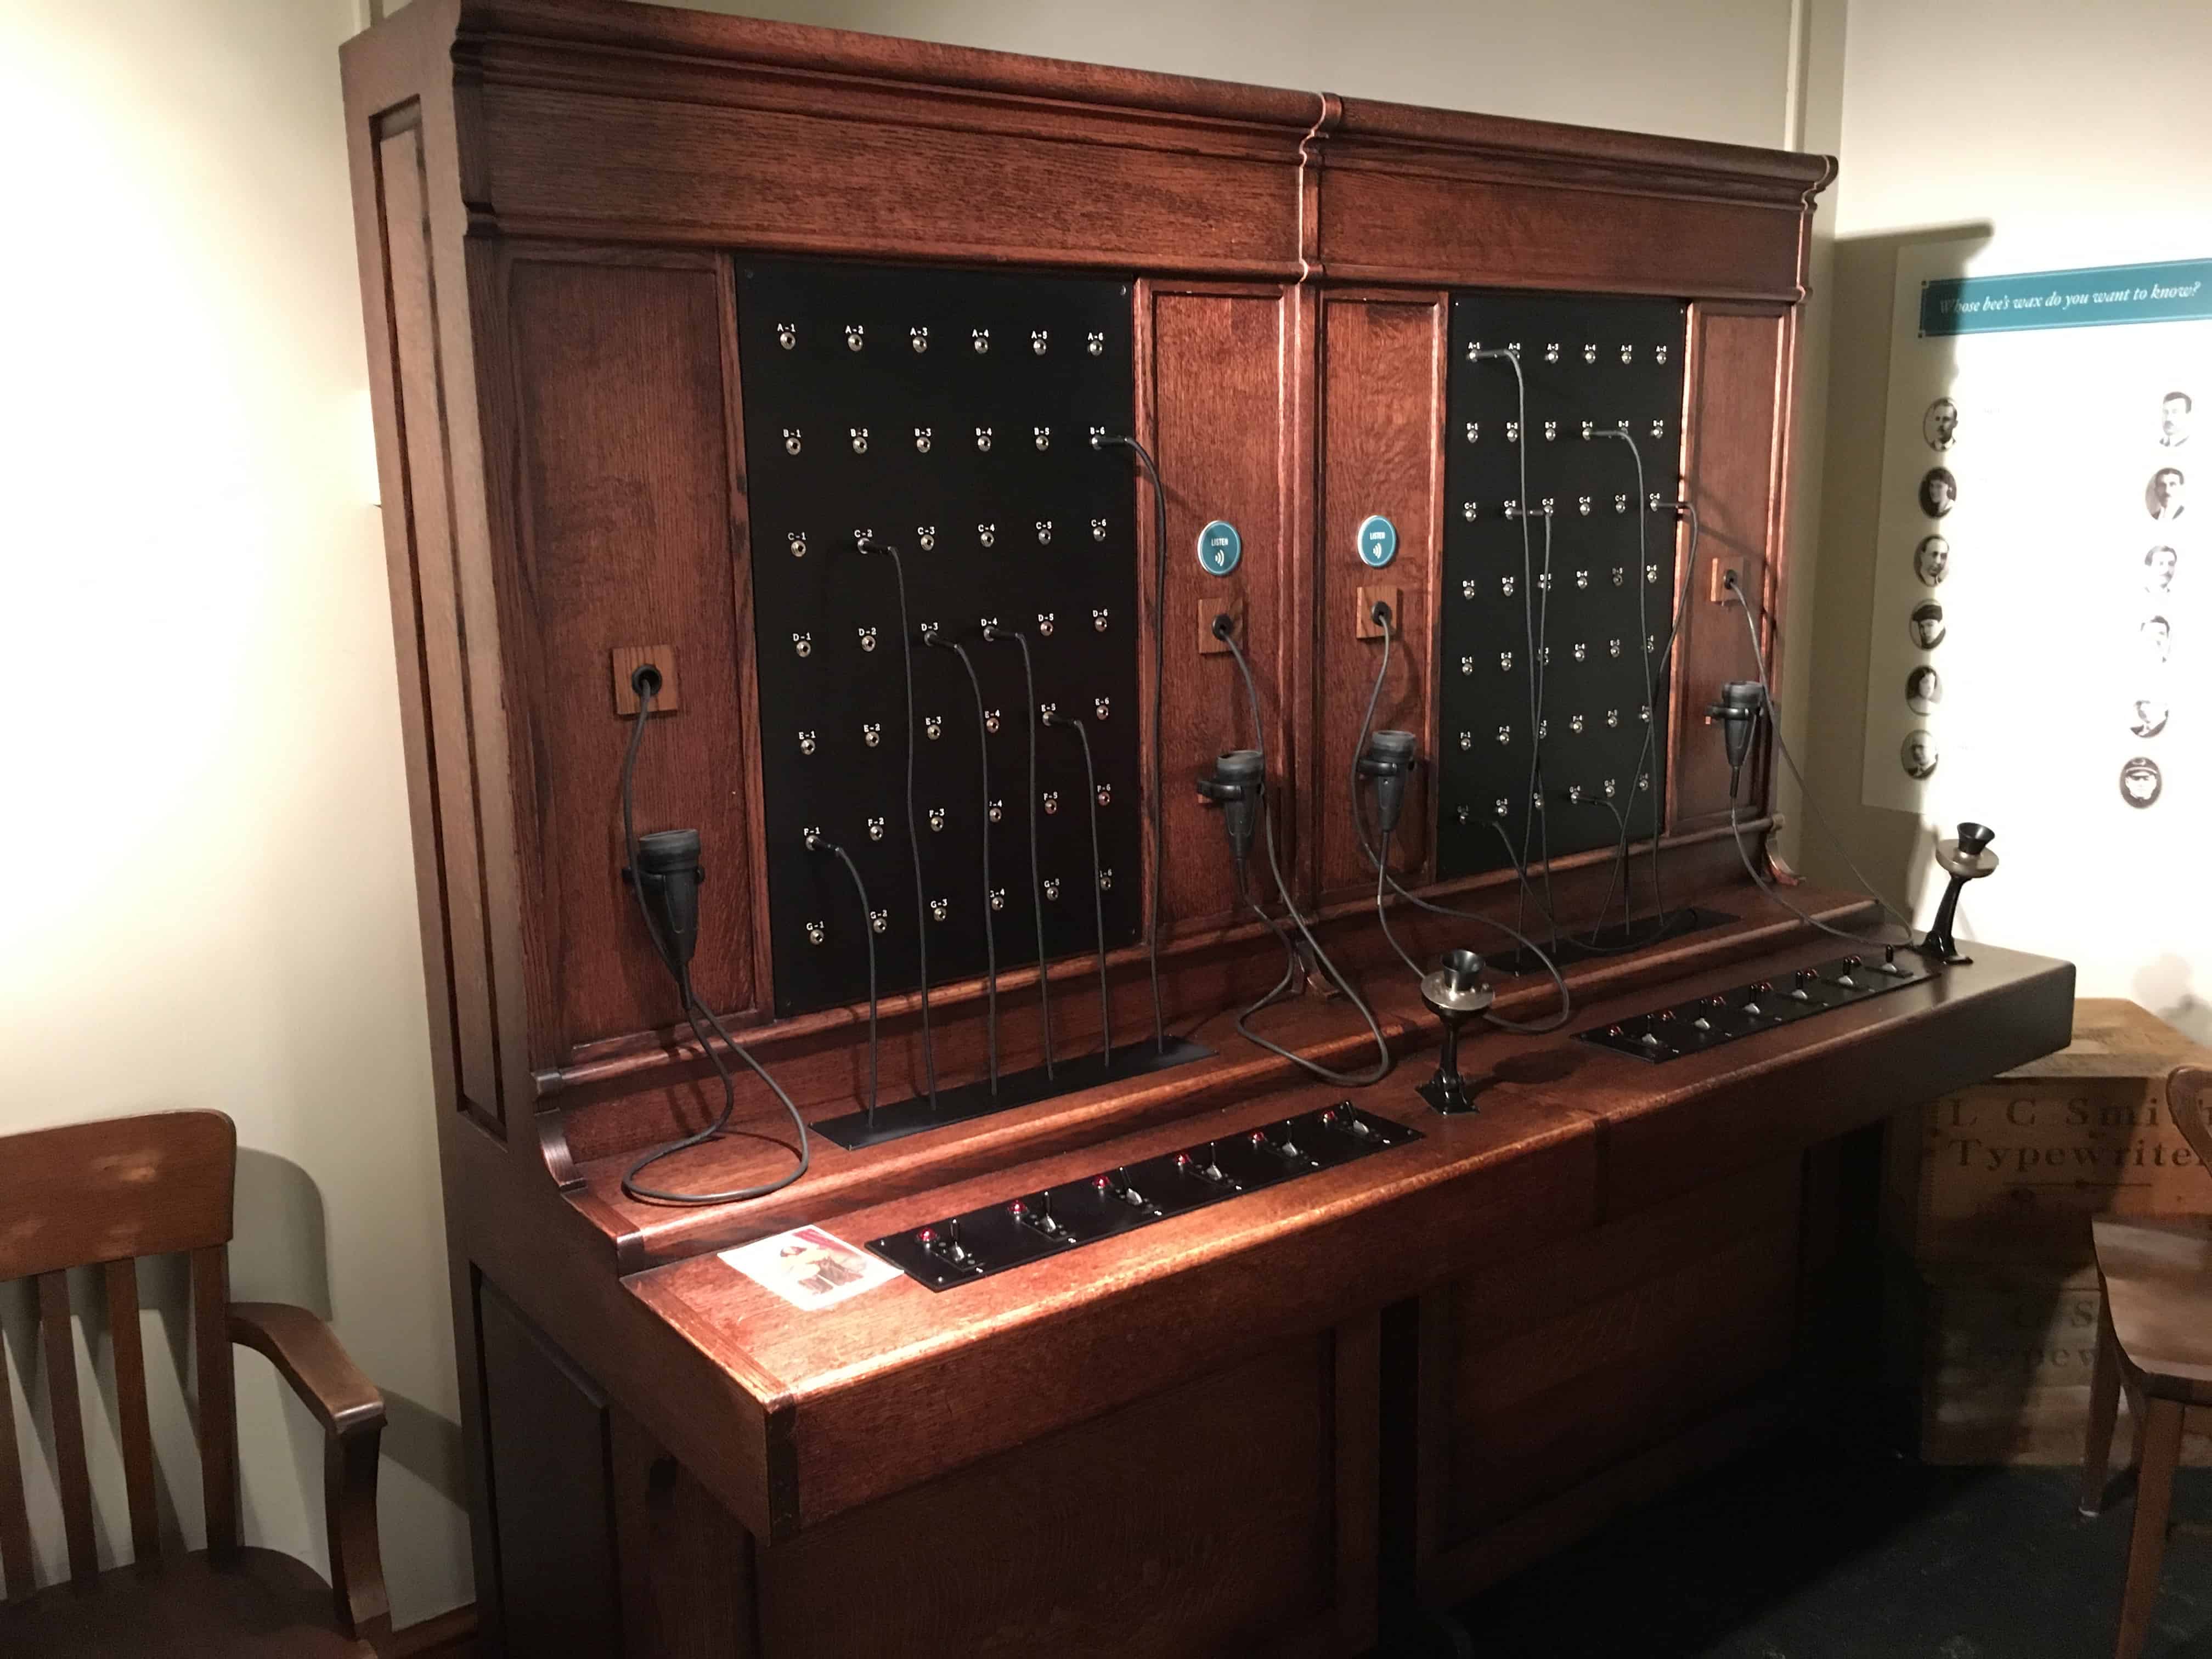 Telephone switchboard at the Smith Tower in Seattle, Washington